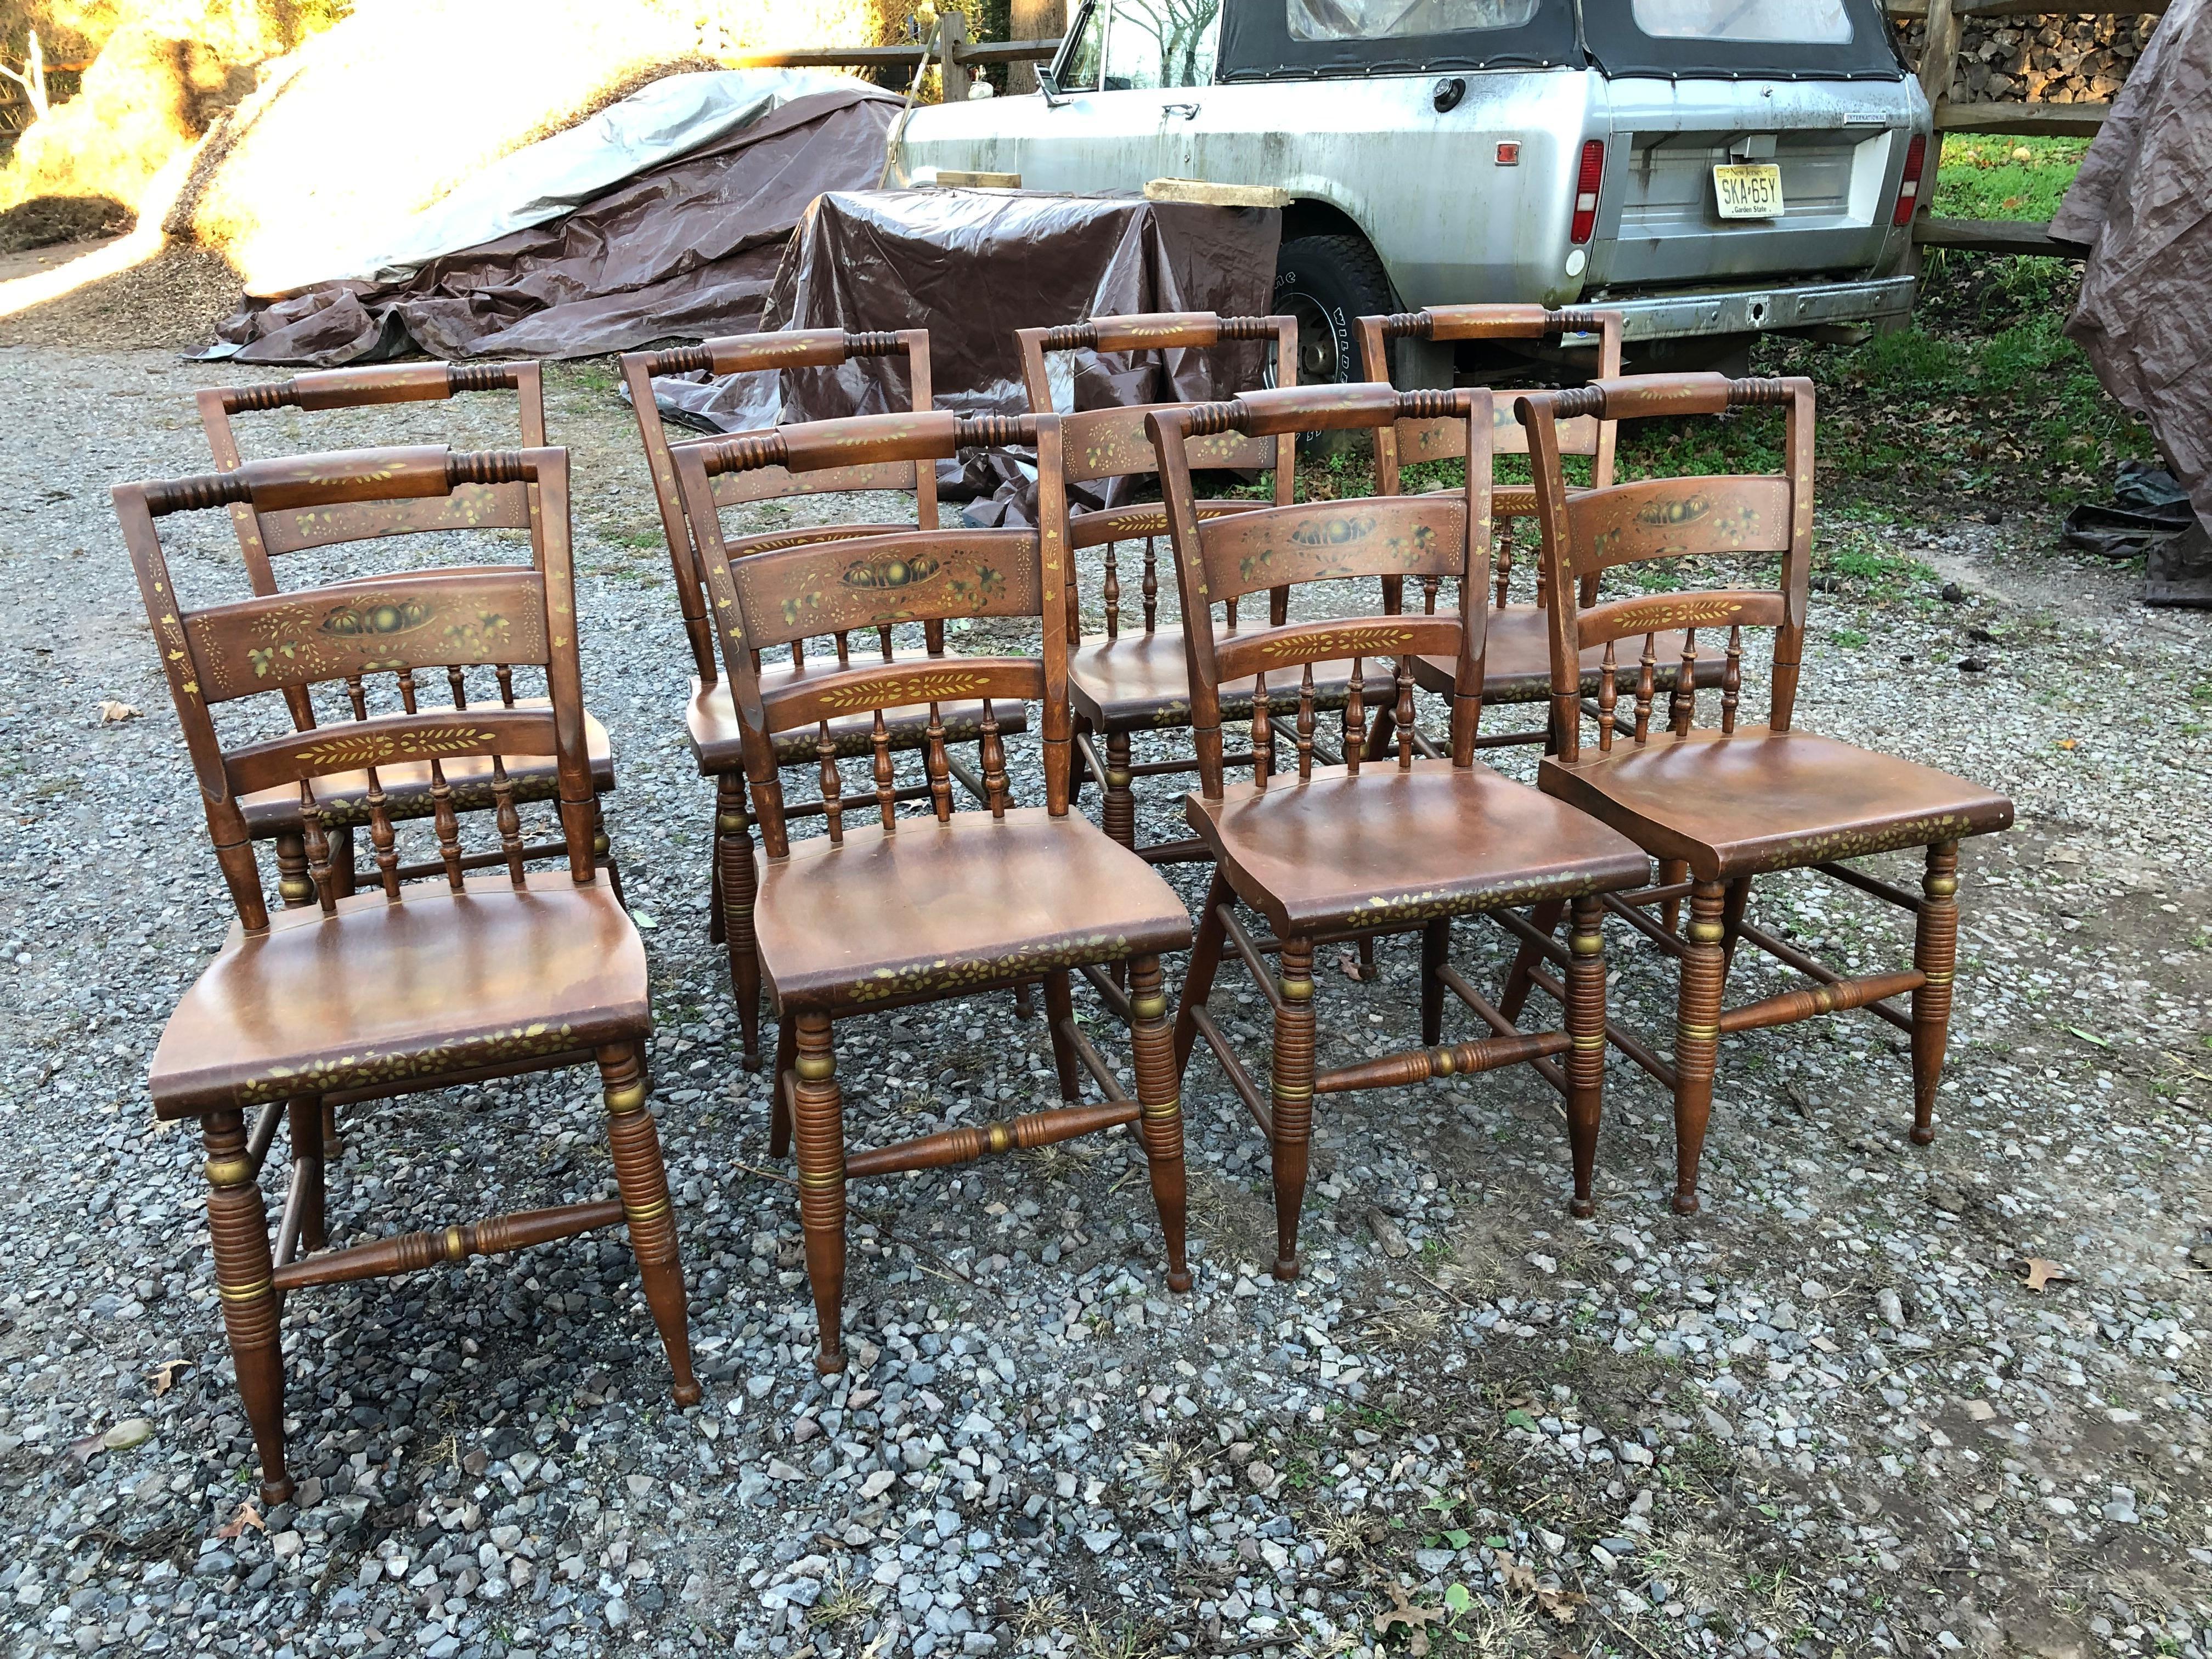 A sturdy timeless set of 10 Nichols & Stone Hitchcock style dining chairs including 8 side chairs and two armchairs. The armchairs are 22.25 w 16.25 d 34.25 h
arm height 27 seat height 18.25
Classic gold painted decoration on honey warm wood.